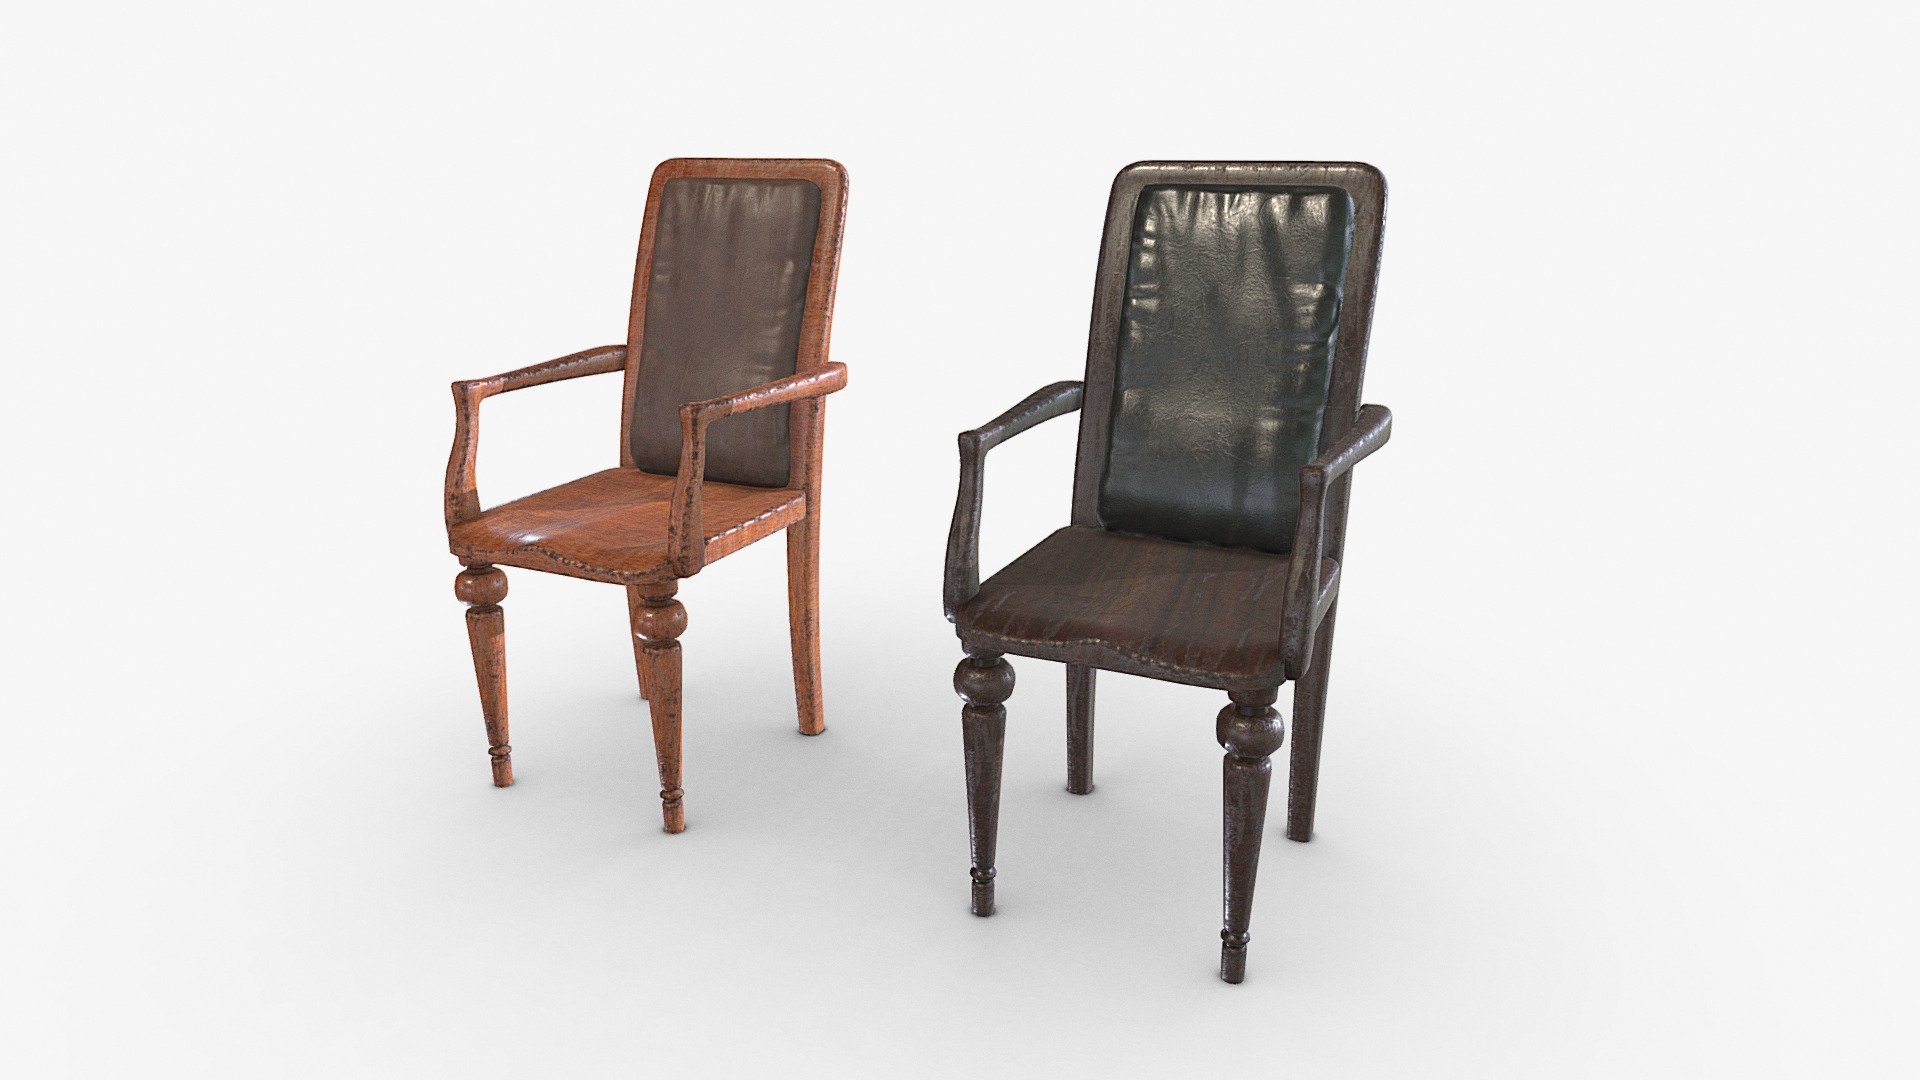 A pair of worn victorian style wooden chairs, one is brown wood and the other is Mahogany. 

Handy prop for any sort of interior environment such as a medievall or horror scene. 

PBR textures @4k - Wooden chairs - Buy Royalty Free 3D model by Sousinho 3d model